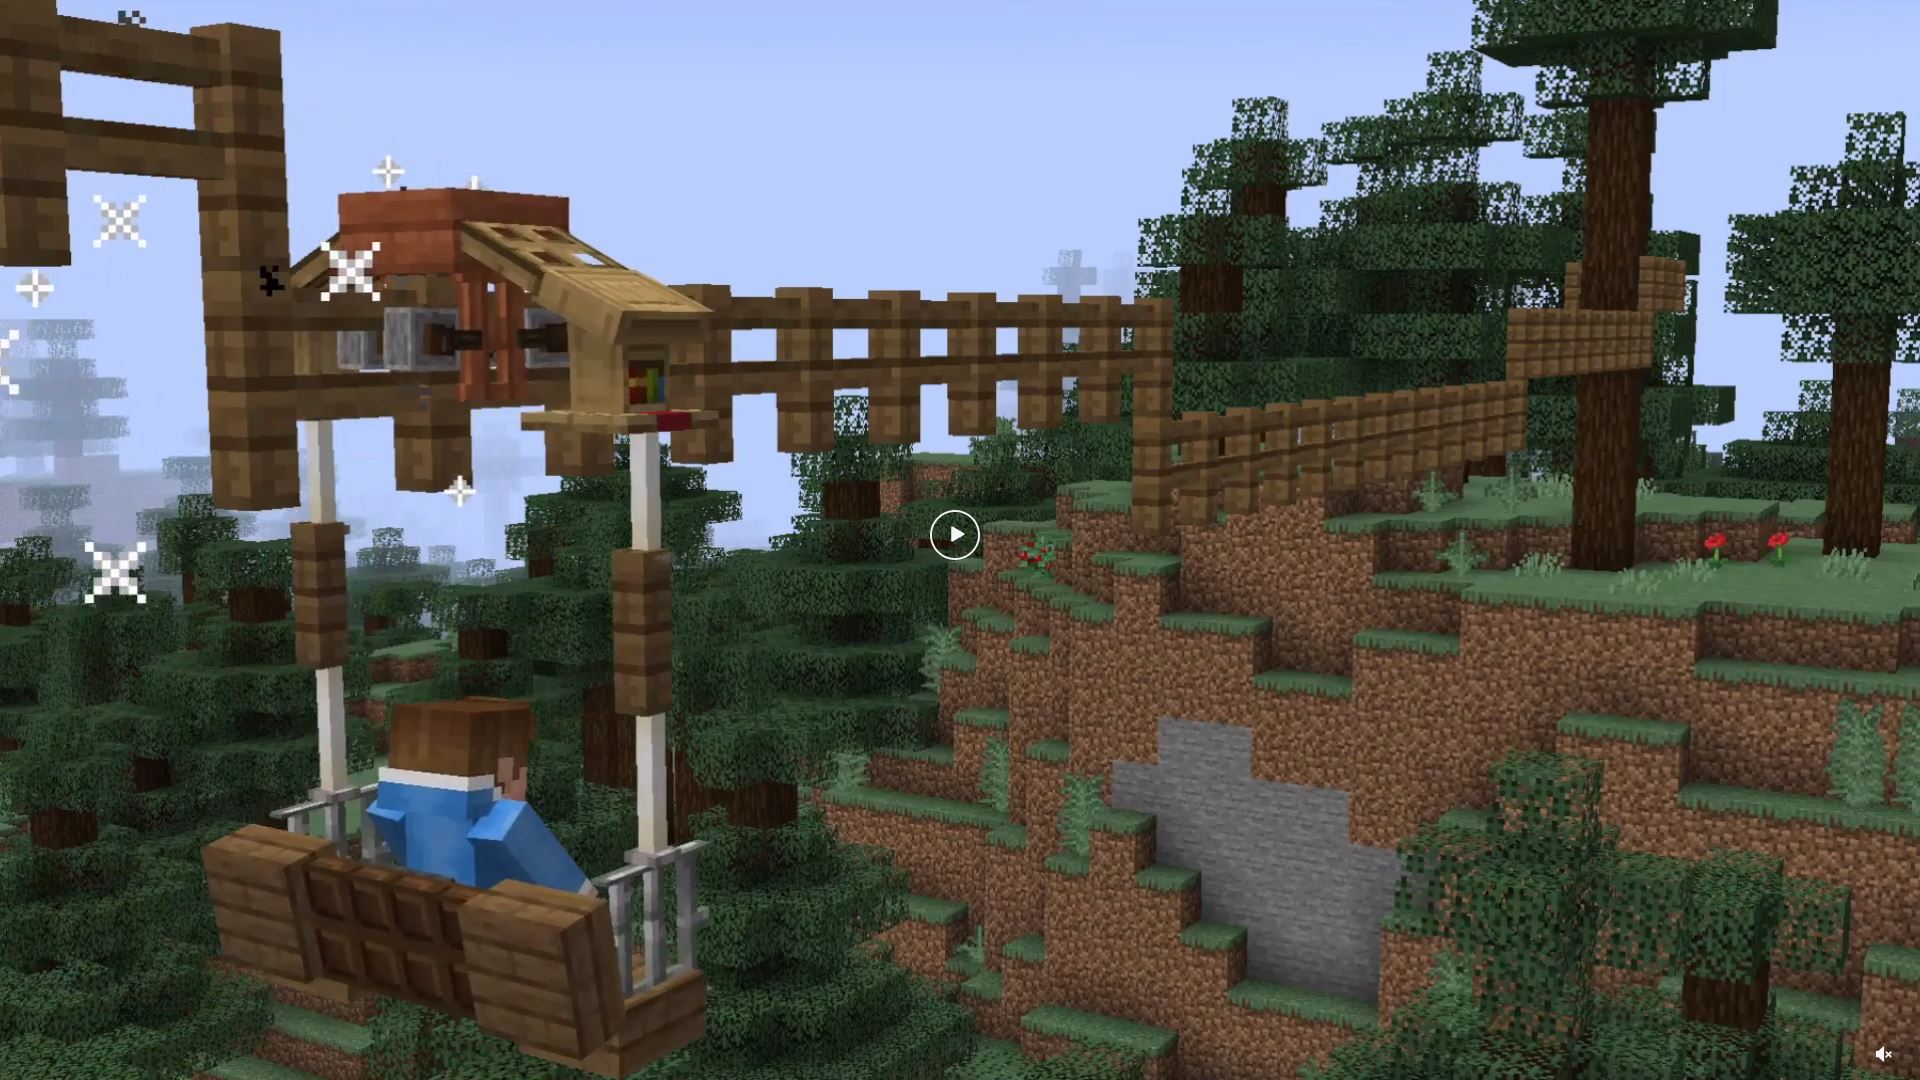 Ever Wanted To Zipline In Minecraft, Redditor ShrimpySeagull Created A Contraption To Do Just That!